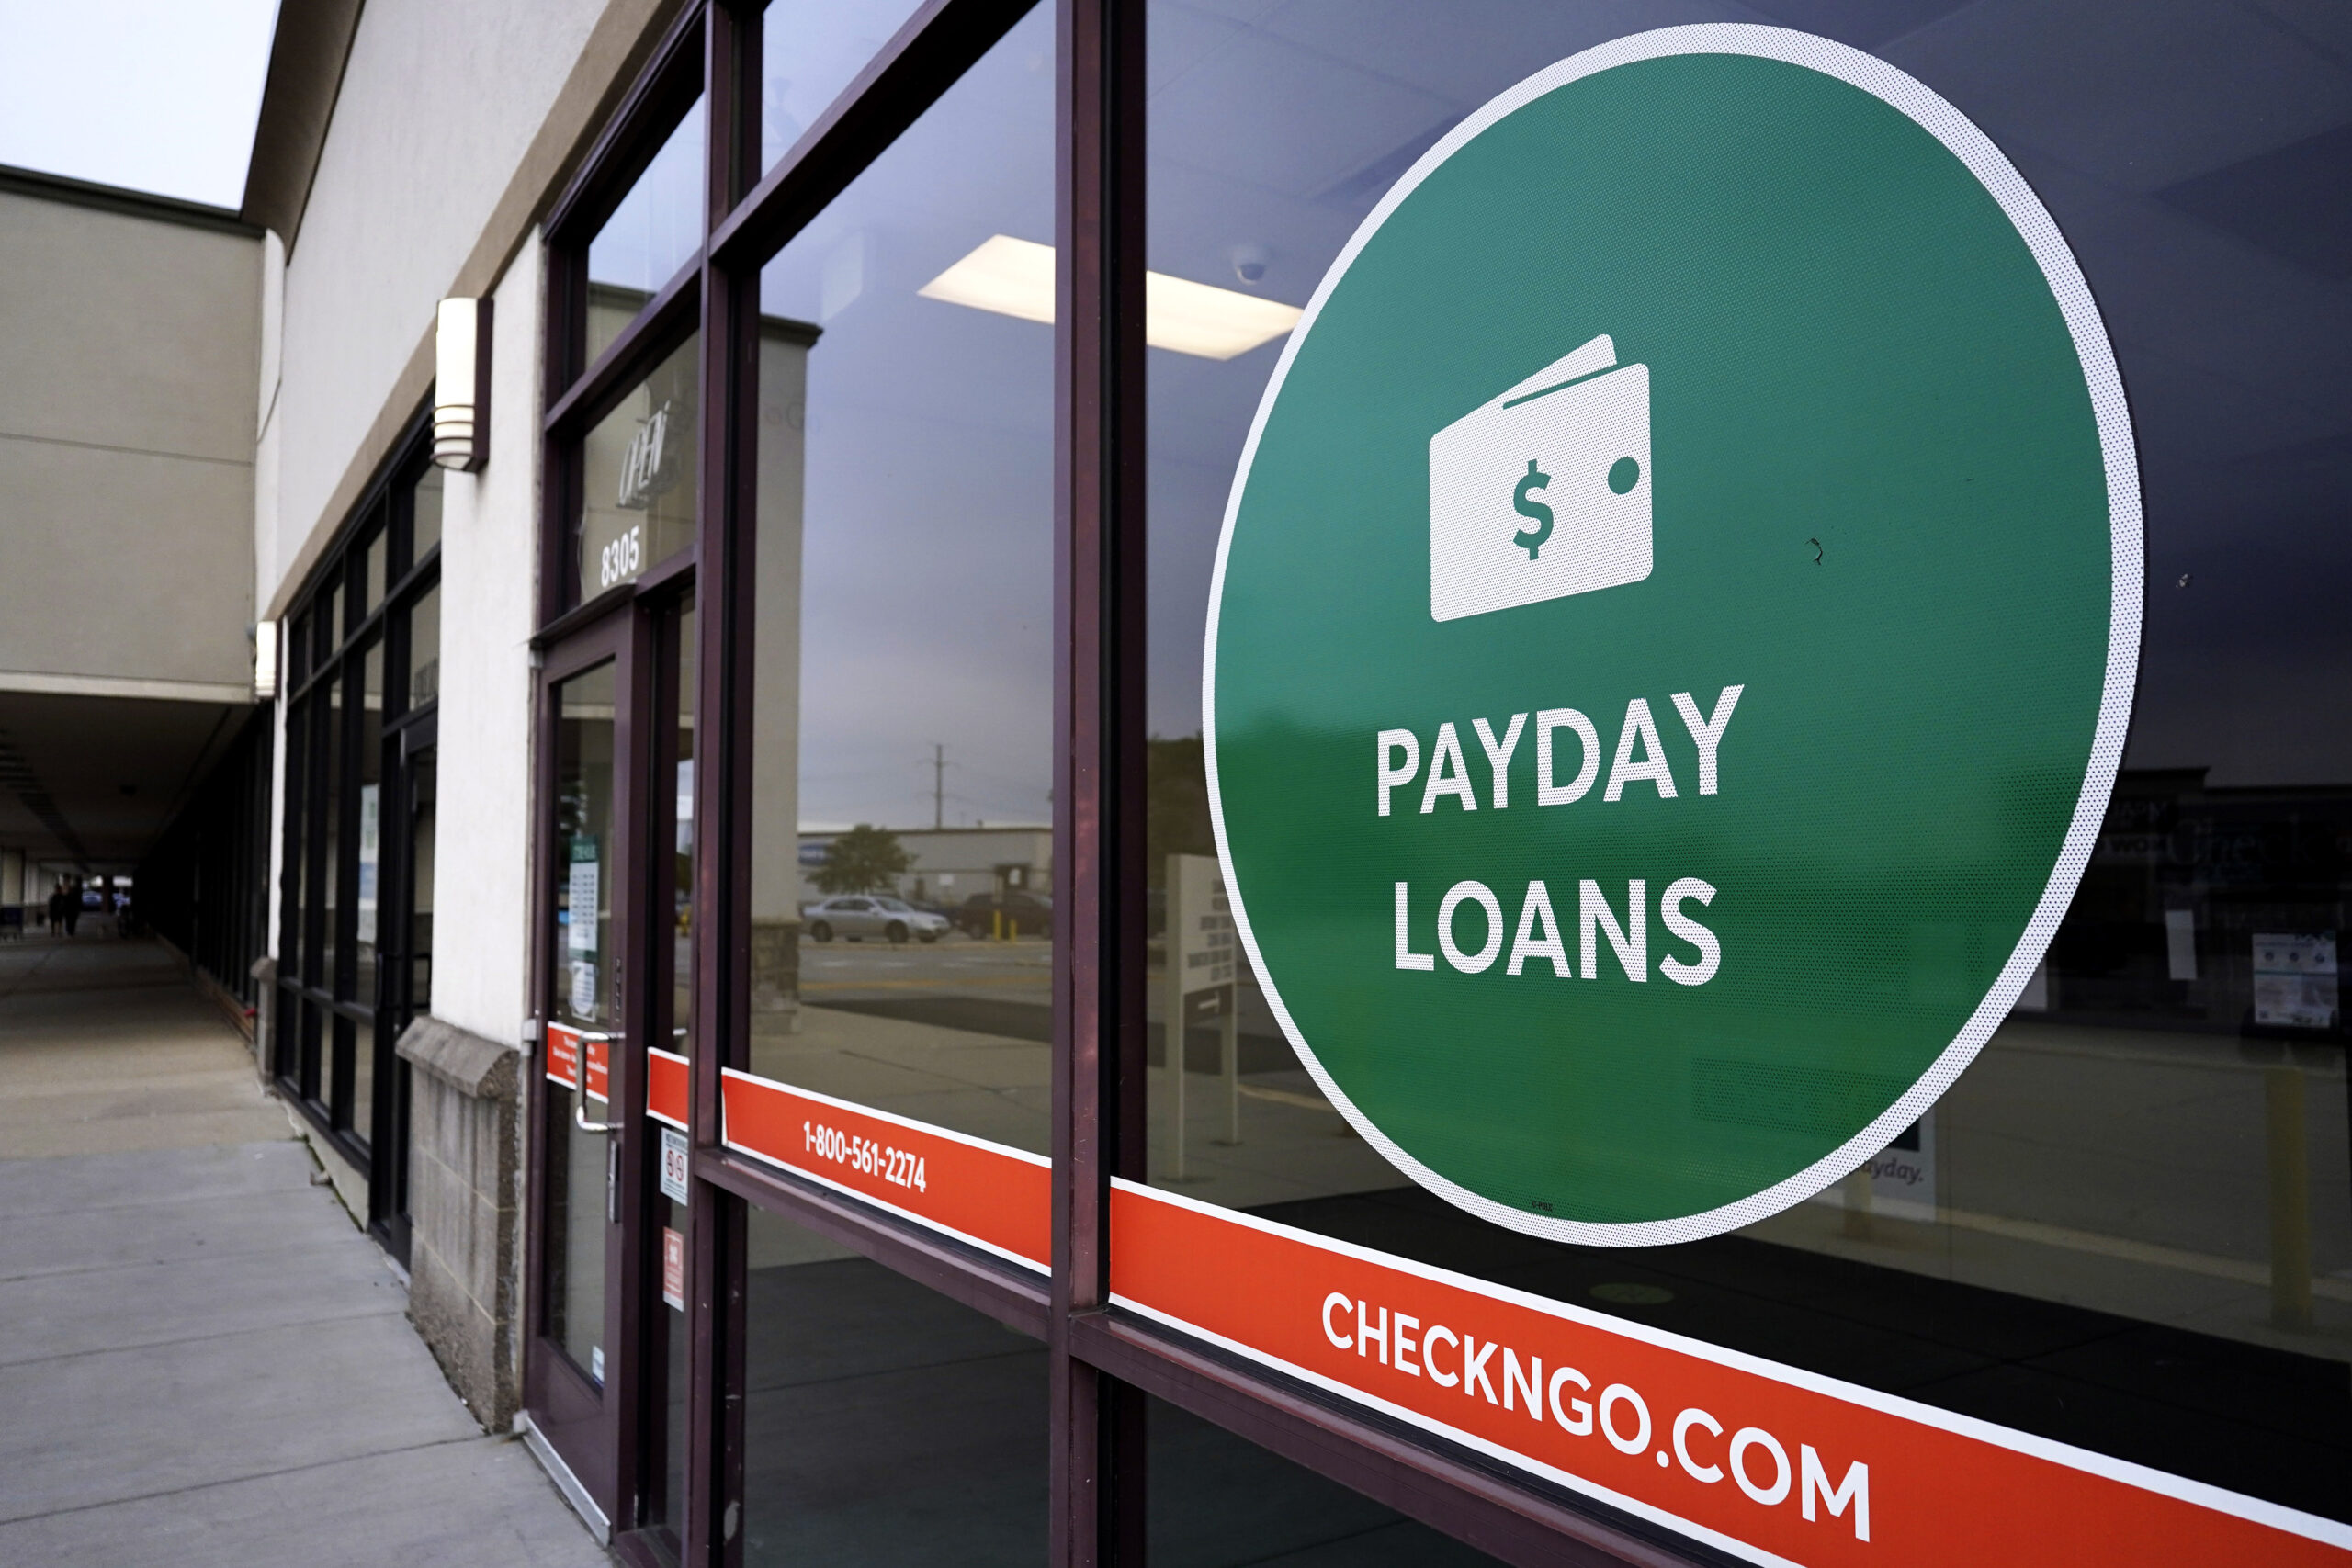 A "Payday Loans" sign is displayed at a Check'n Go